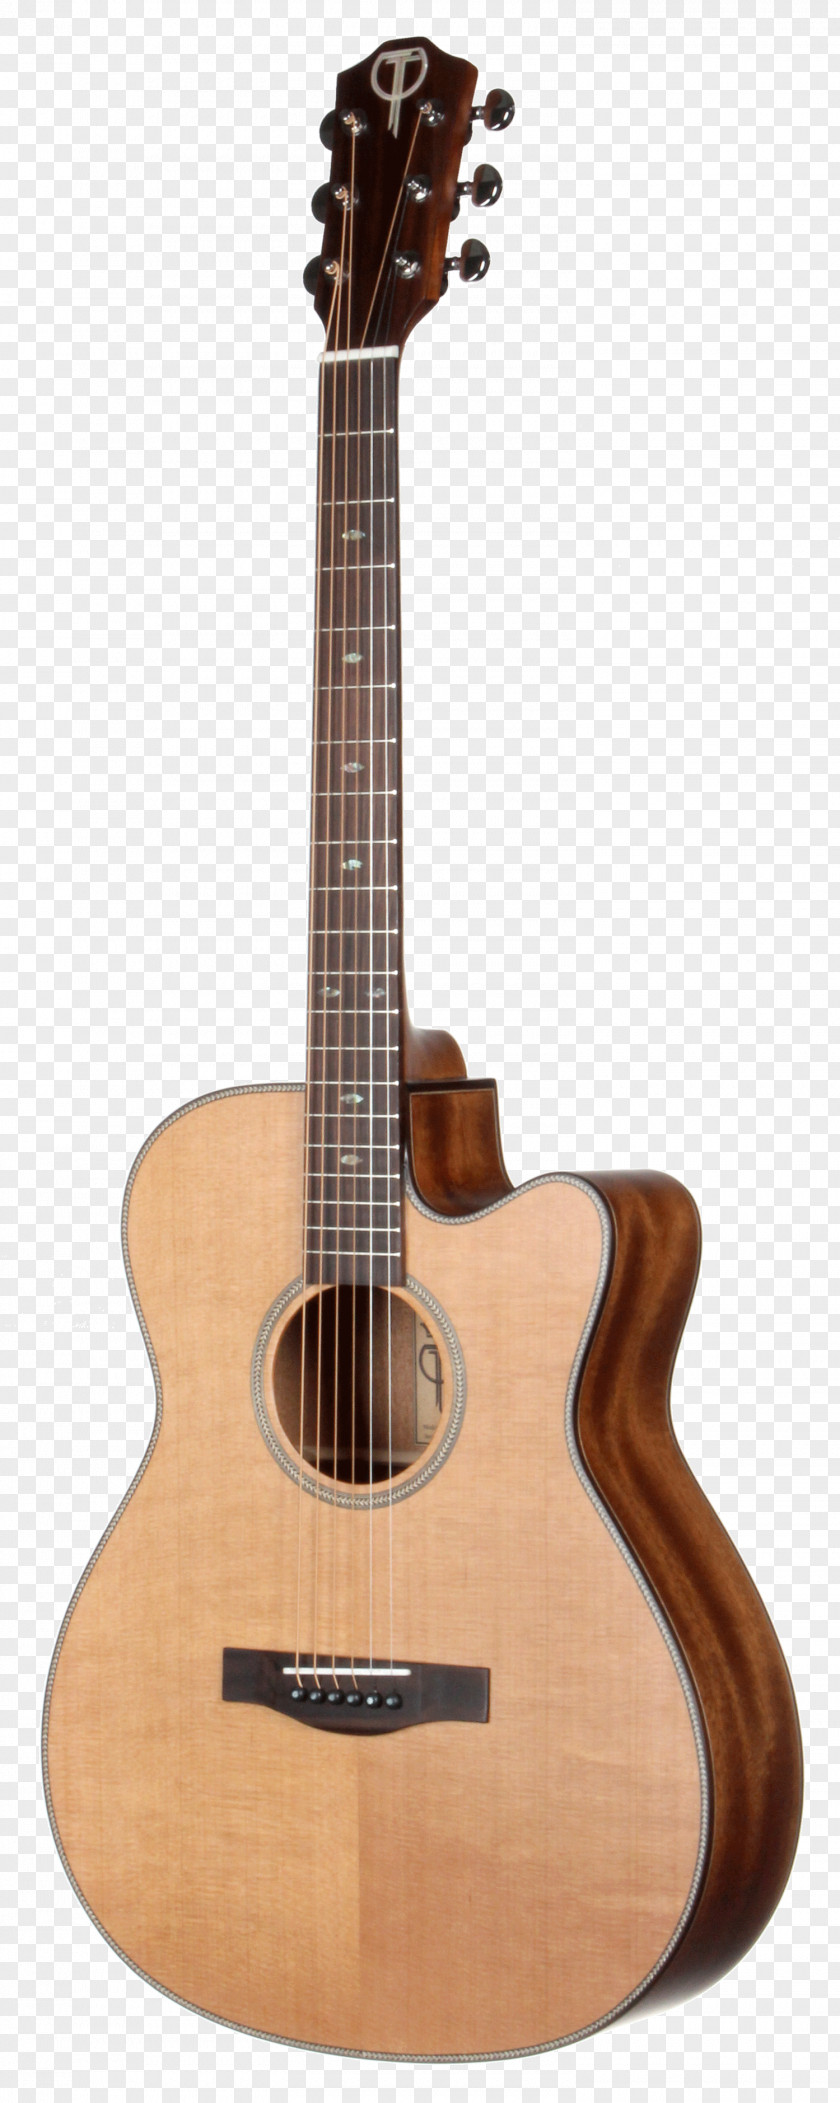 Acoustic Guitar Dreadnought Musical Instruments String PNG